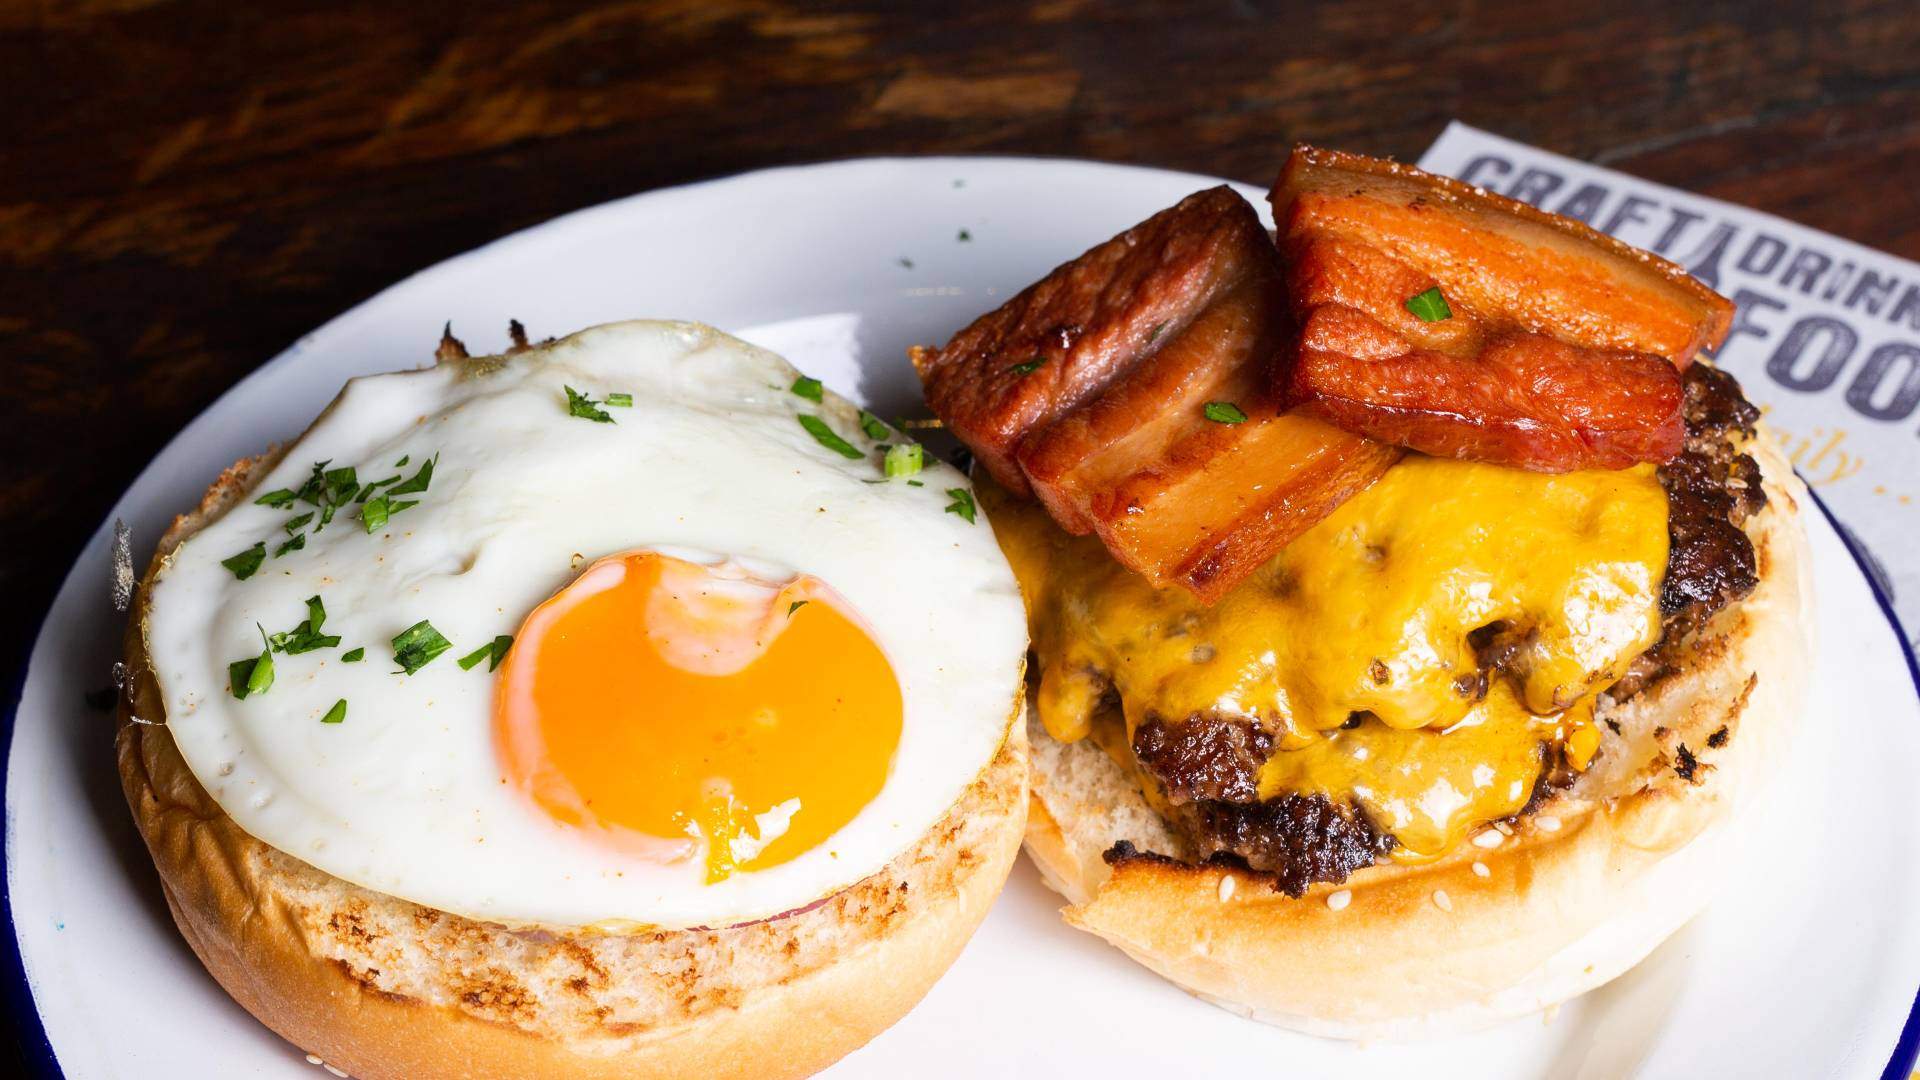 cheeseburger with fried egg from 5 Boroughs